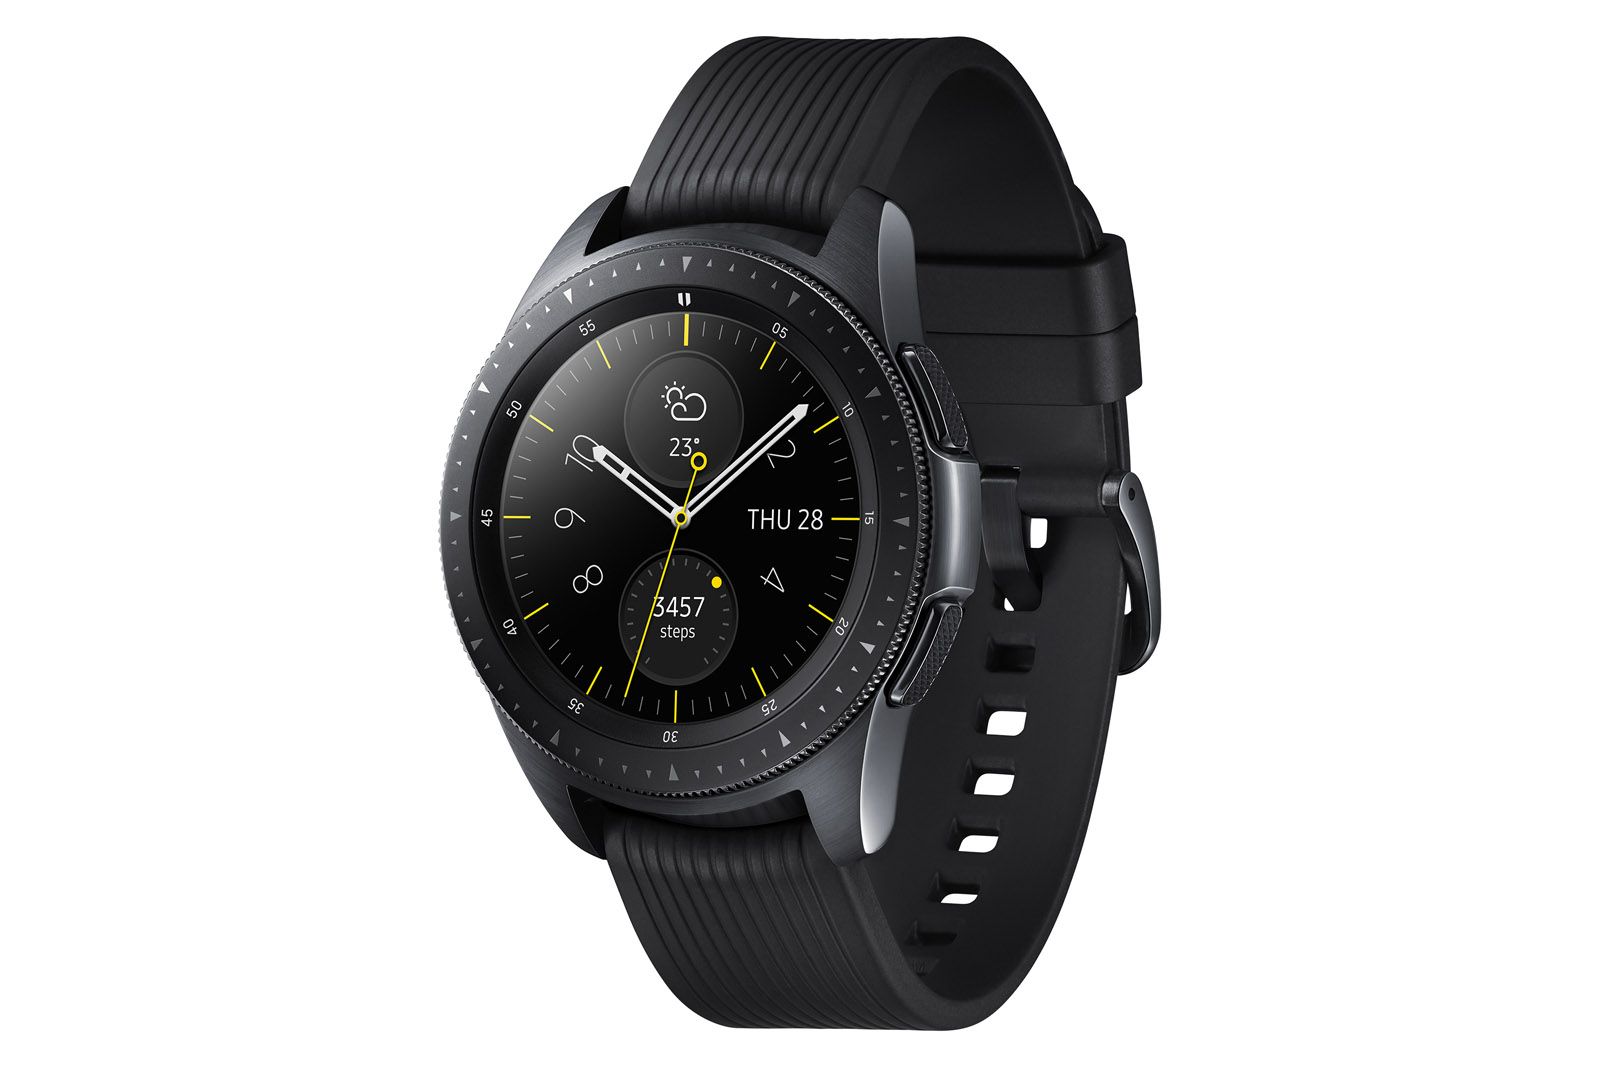 Samsung Galaxy Watch Official Several Days Battery On A Single Charge image 1